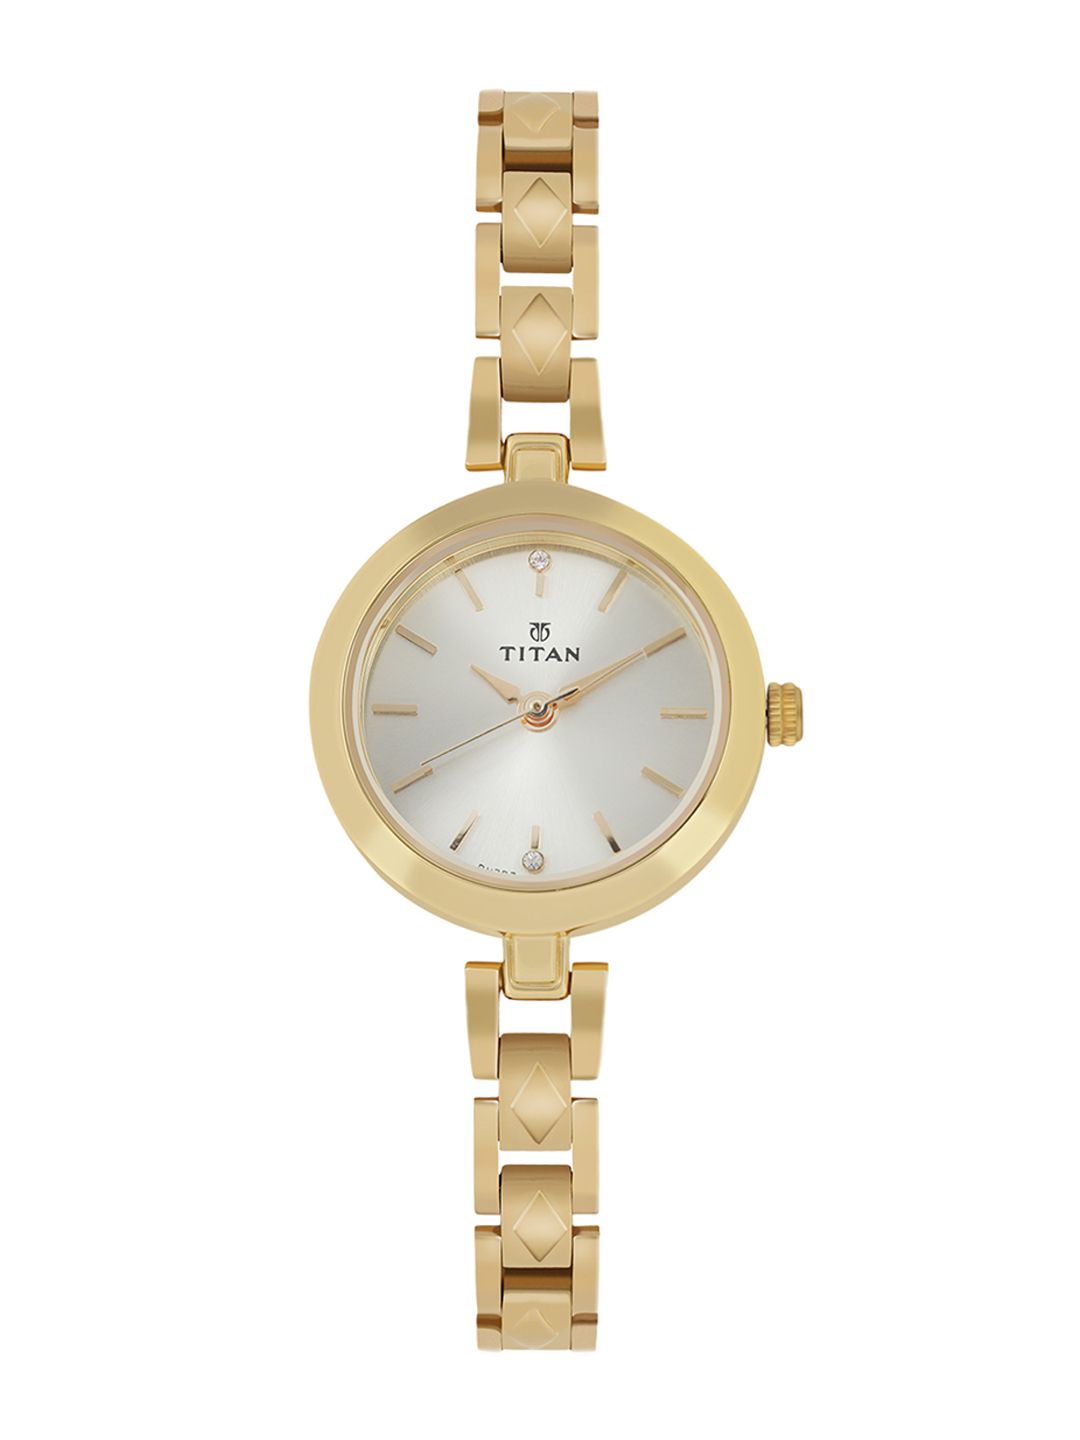 Titan Women Silver-Toned Analogue Watch 2598YM01 Price in India